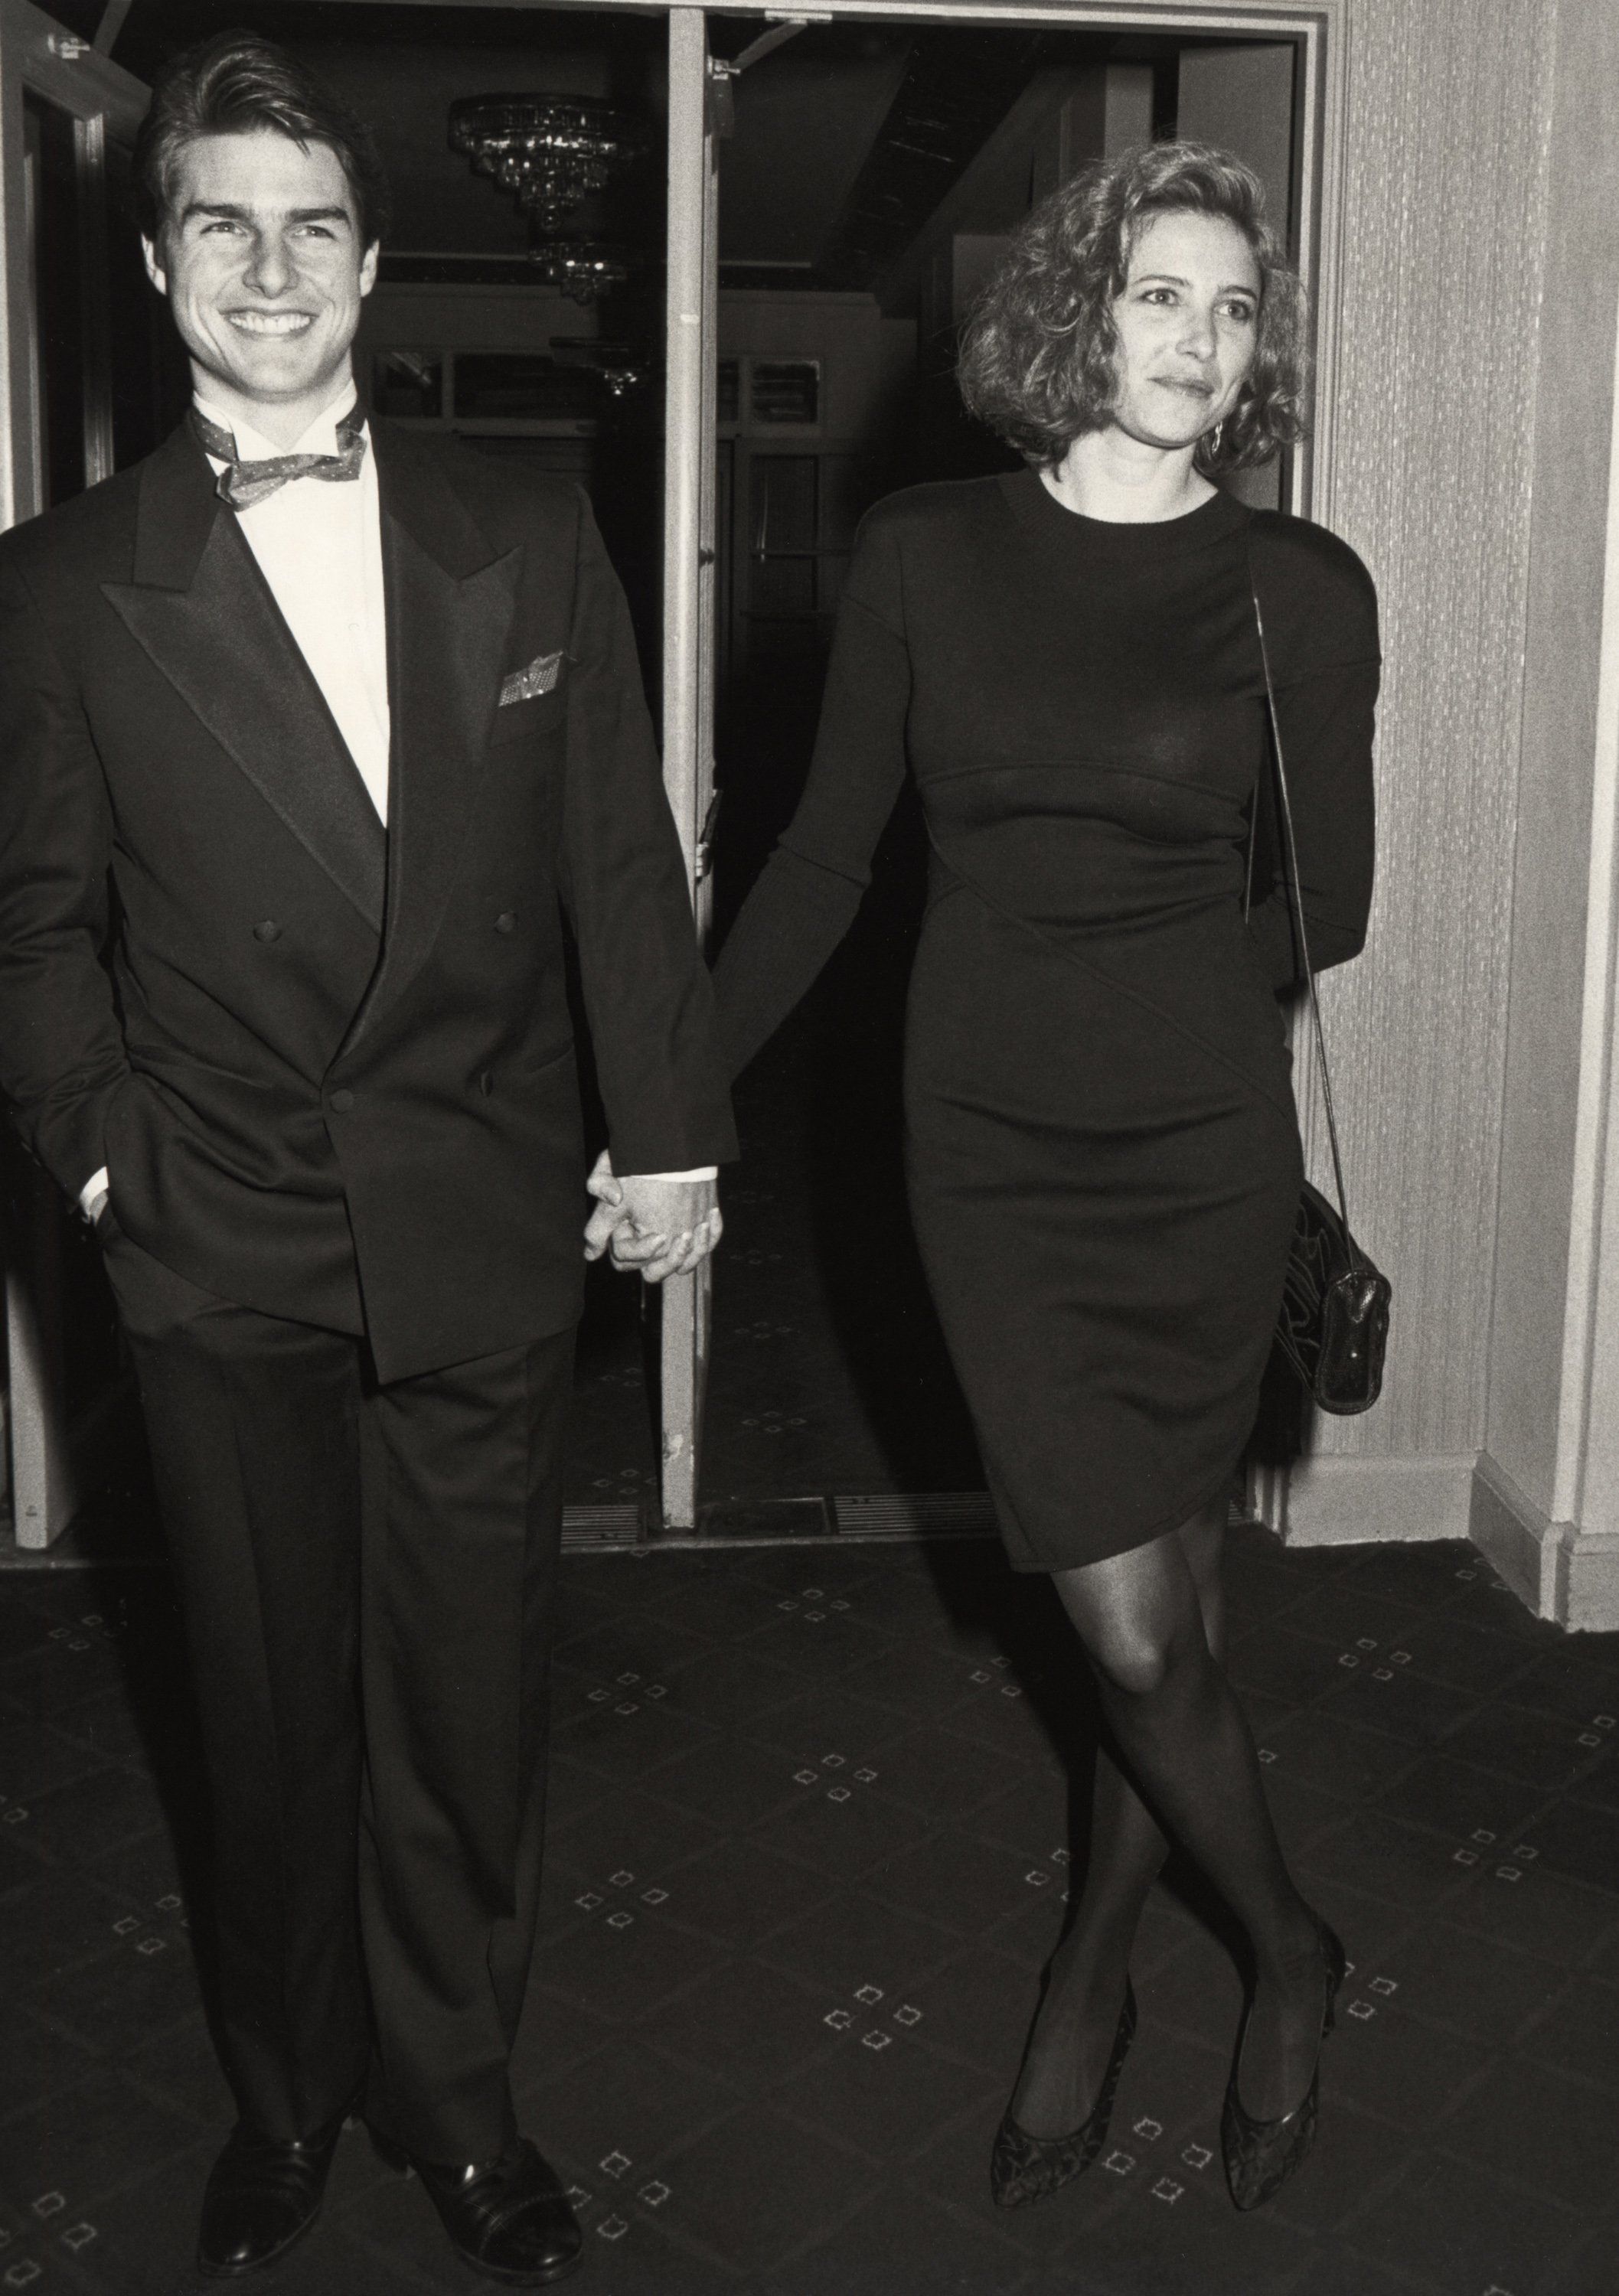 Tom Cruise and Mimi Rogers attend a Tribute to Elia Kazan at the American Museum of Moving Images in 1987